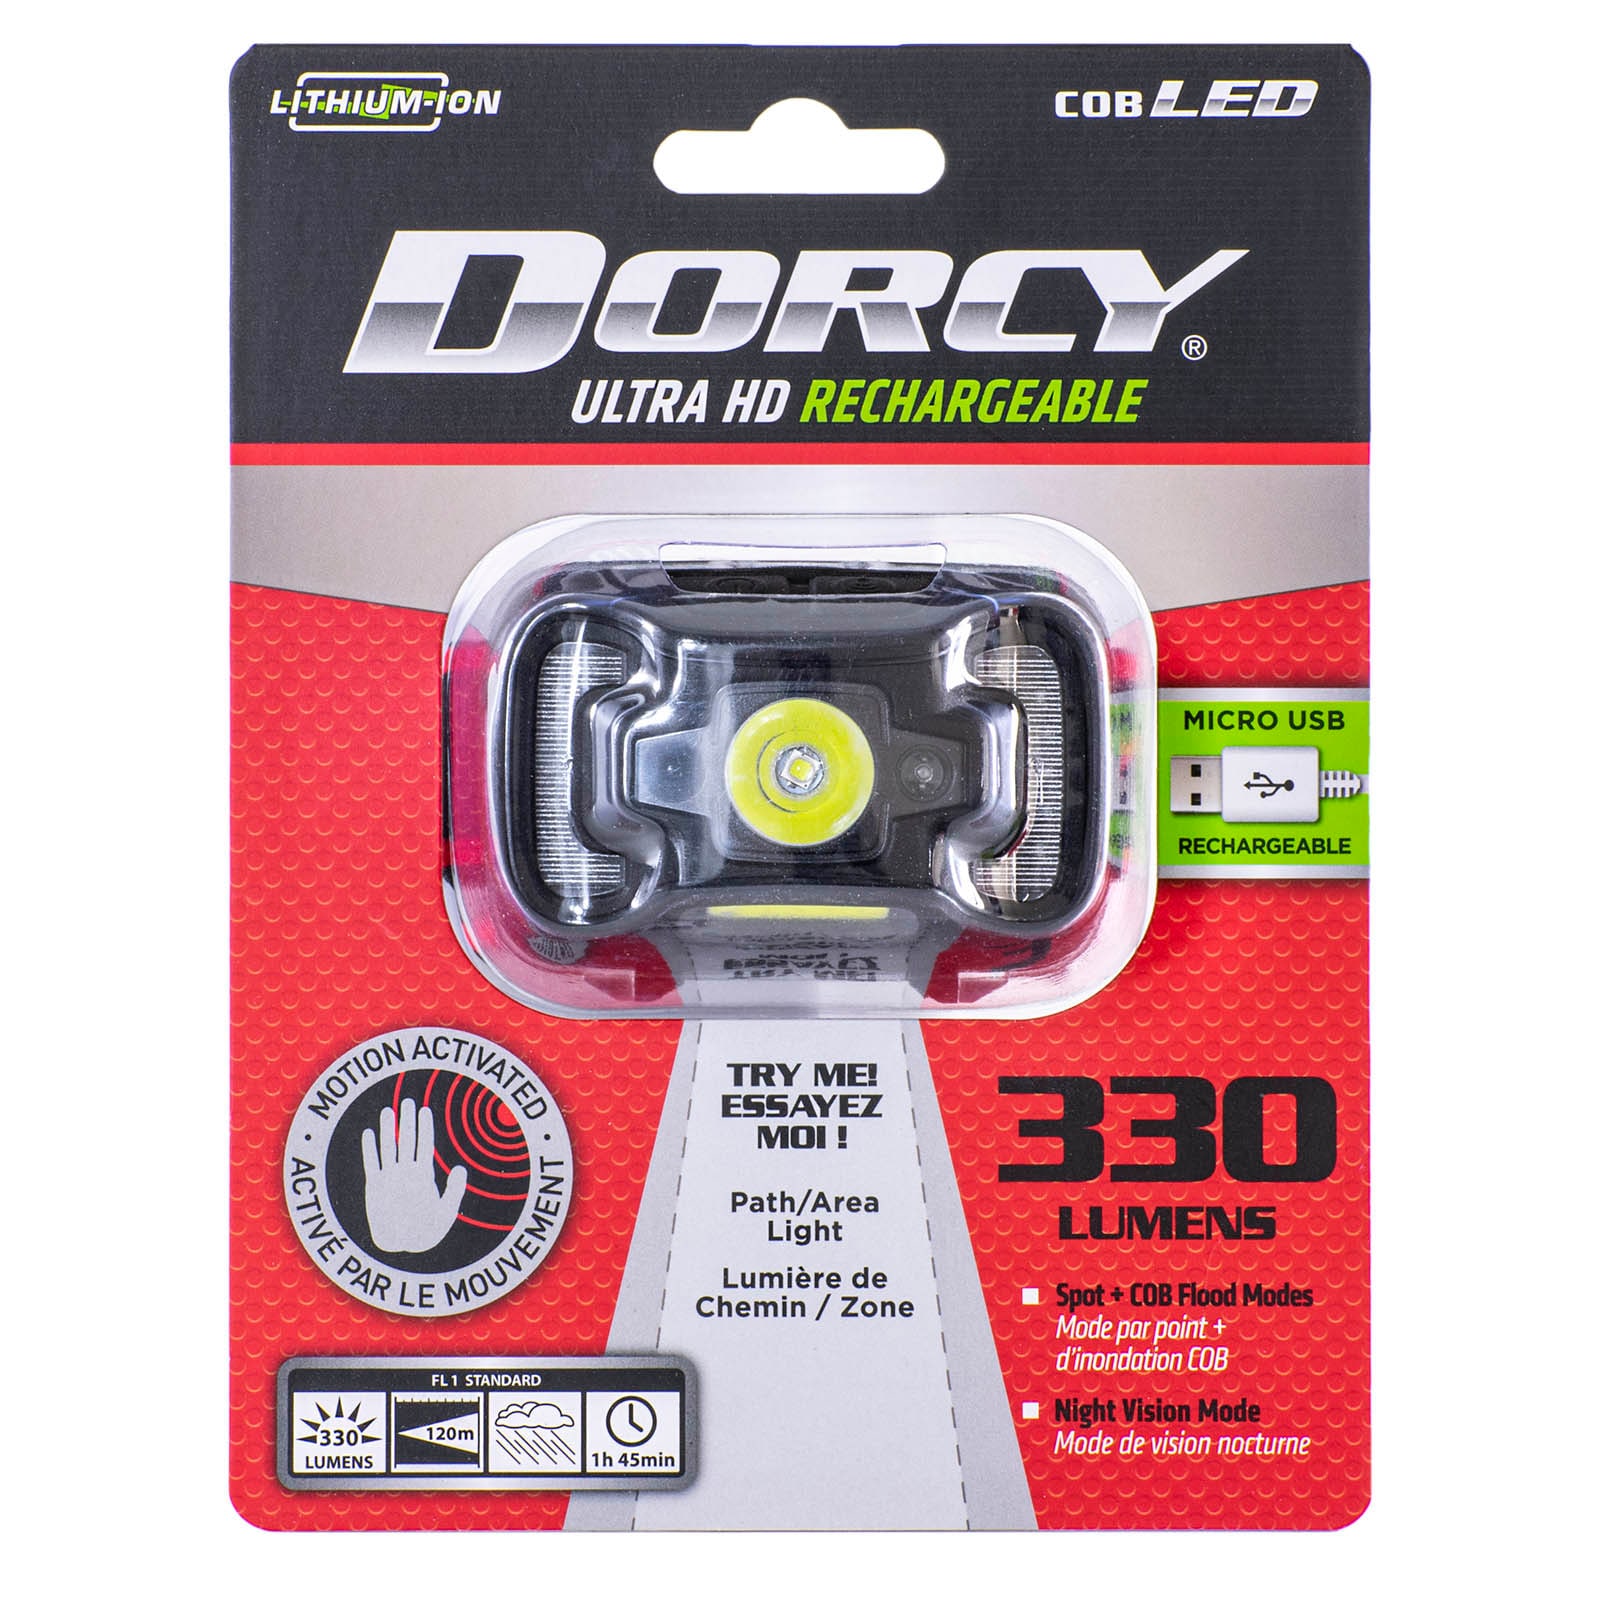 330-Lumen LED Rechargeable Headlamp (Battery Included) | - Dorcy International 41-4359